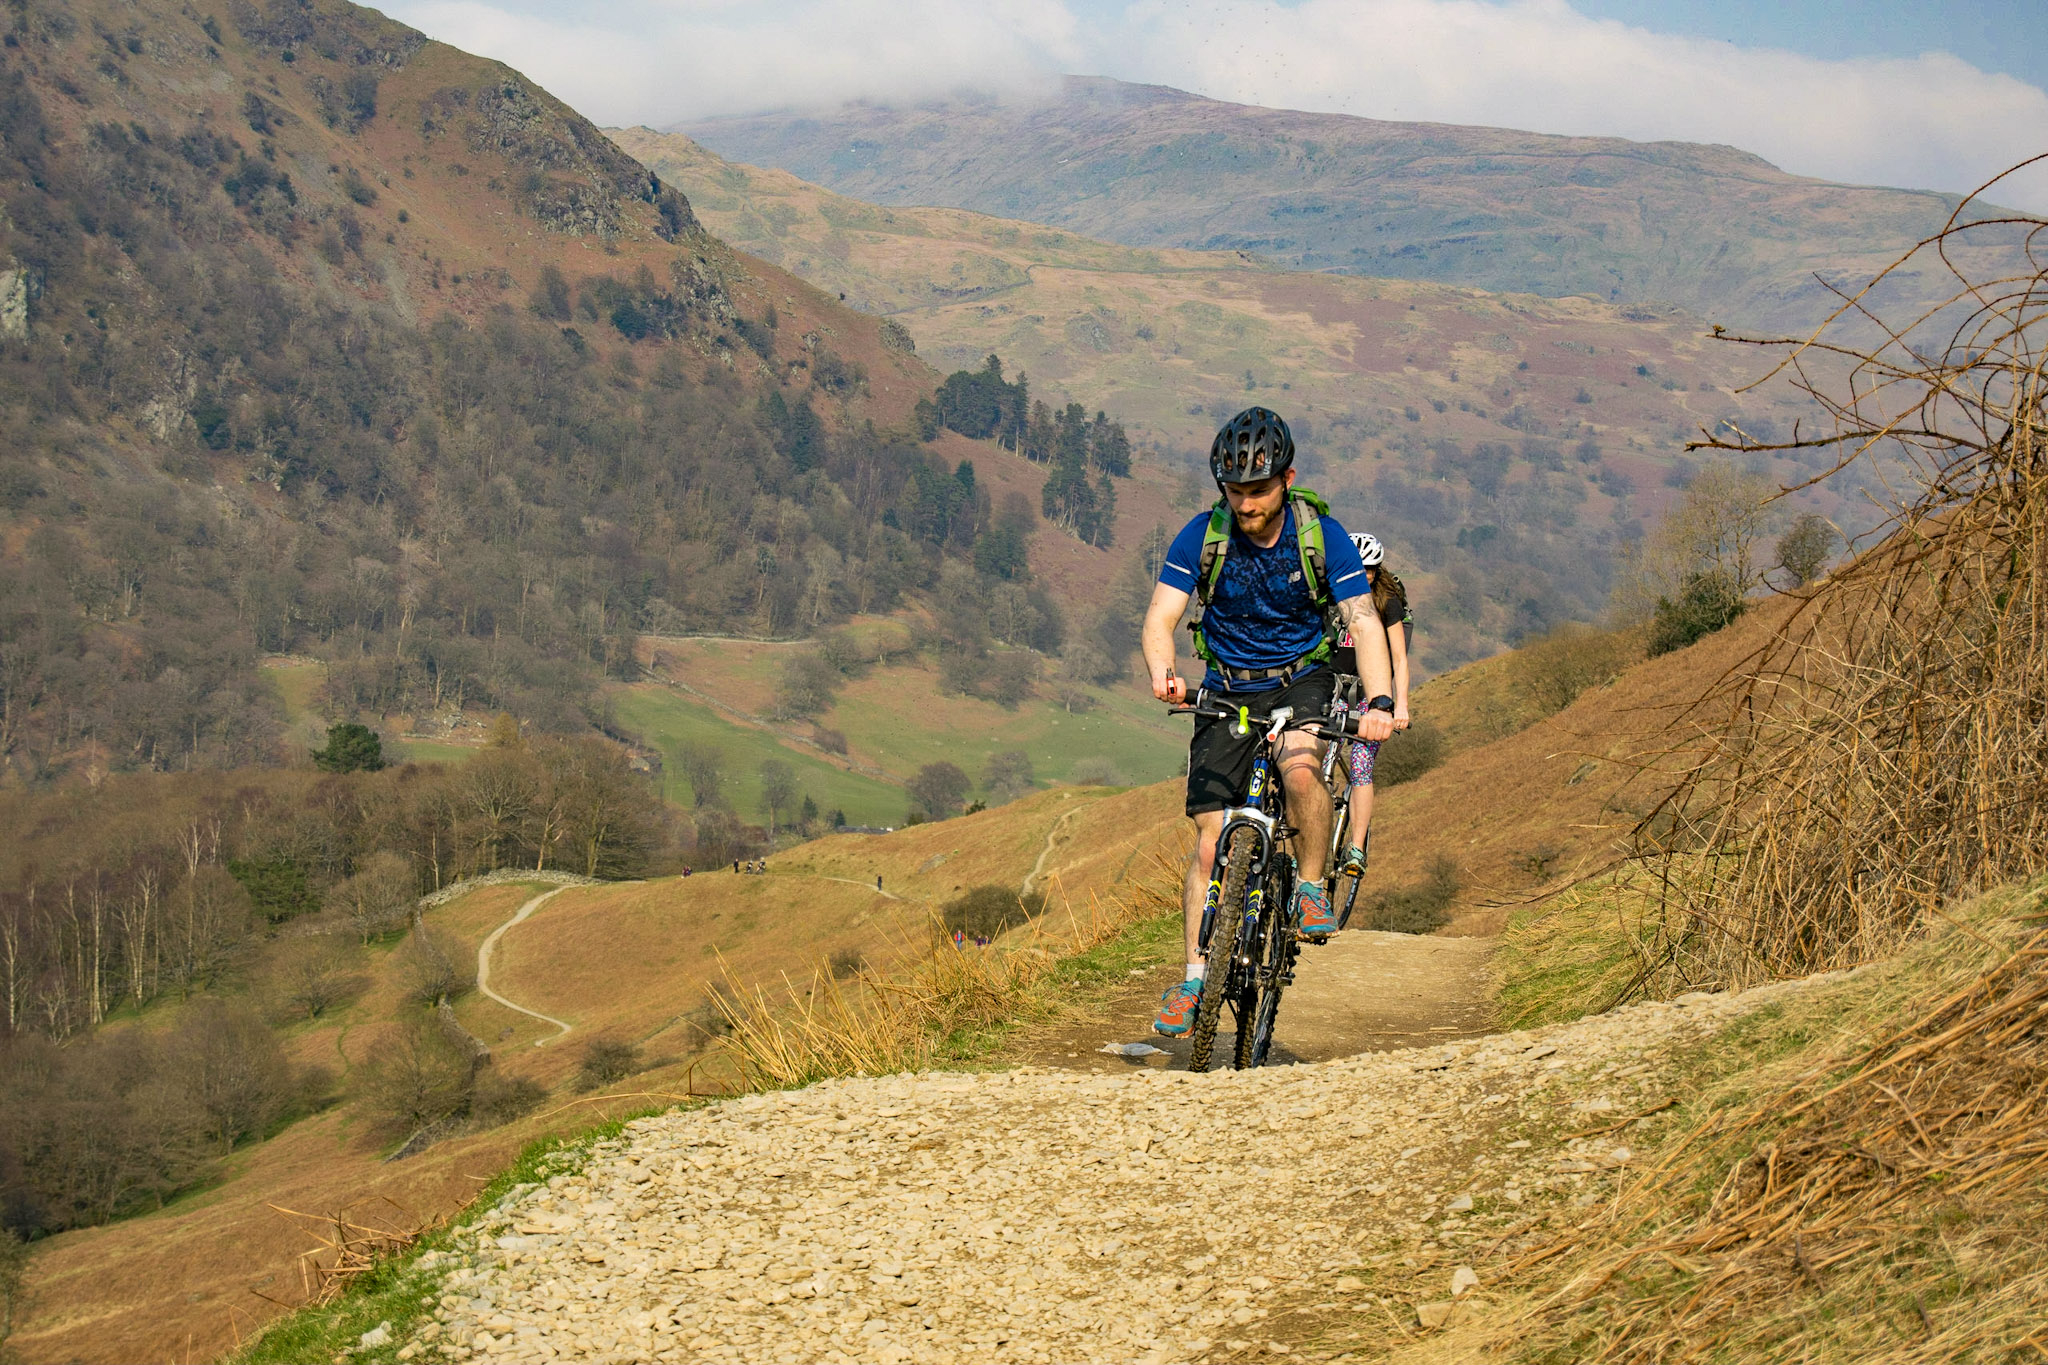 Get active at our Ambleside campus